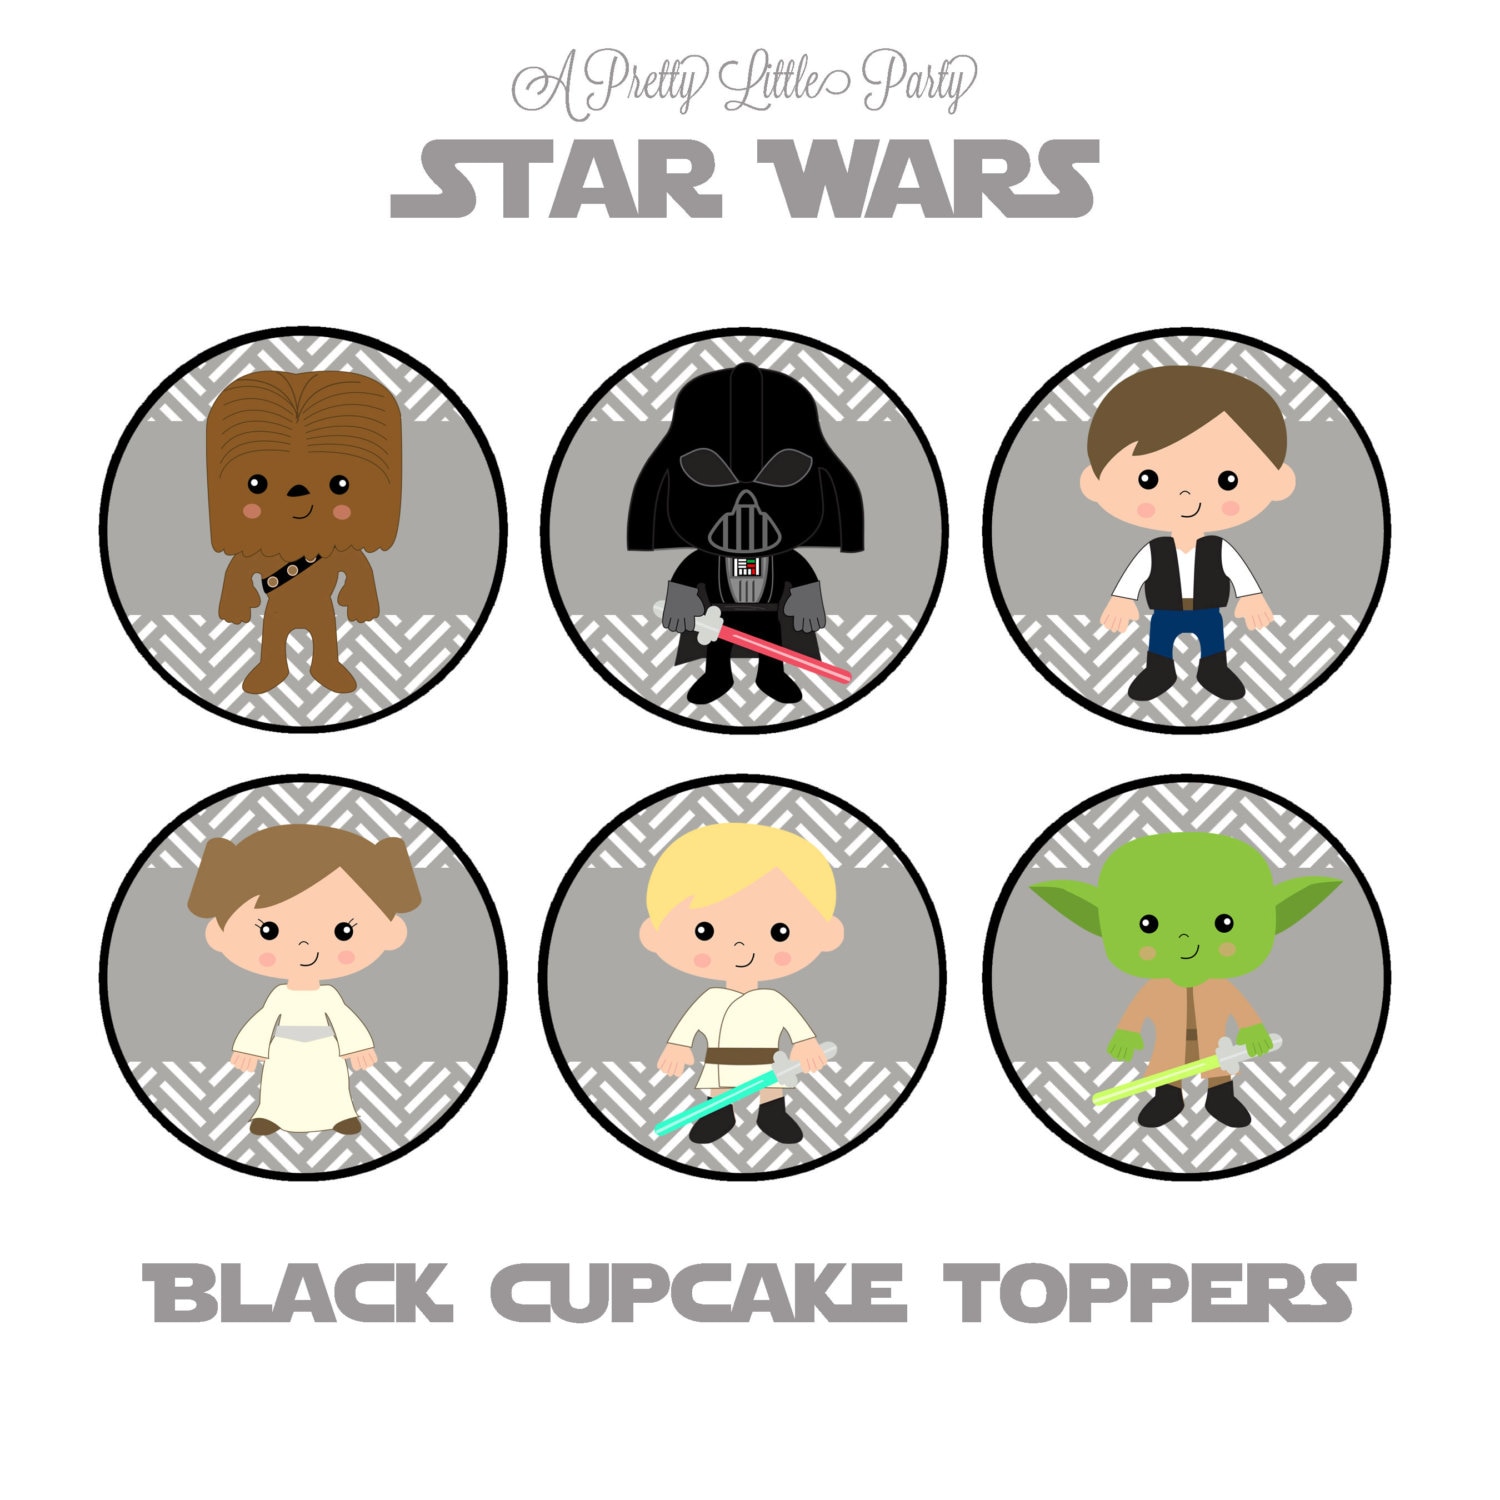 Star Wars Cupcake Toppers Character Cupcake Toppers Star